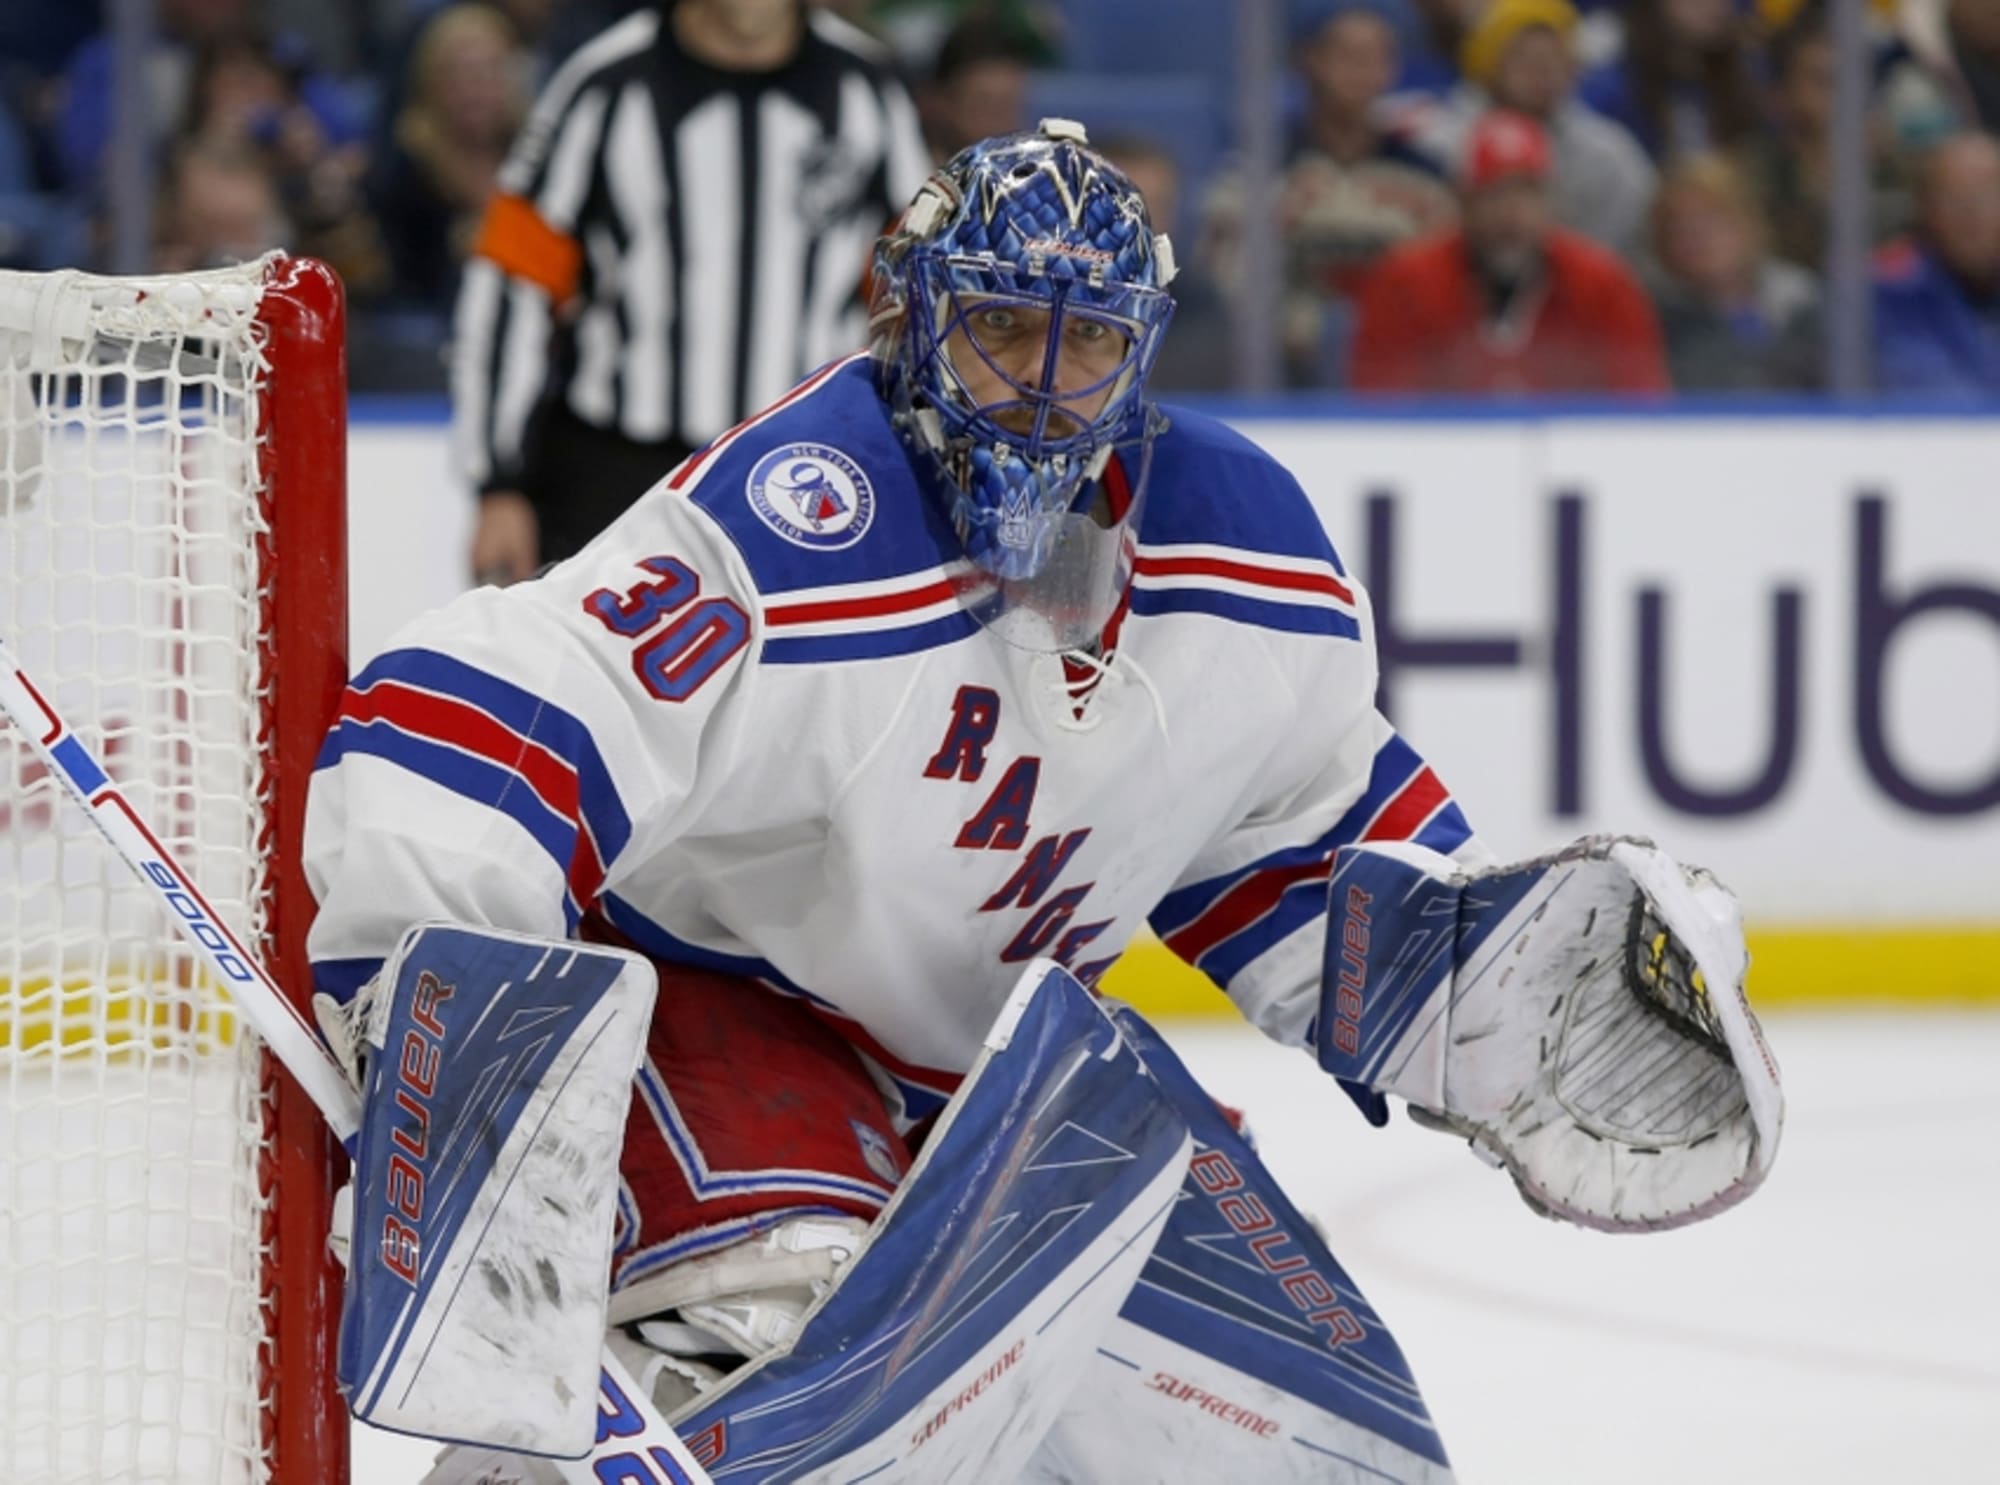 File:Henrik Lundqvist awarded as the best goalie of all time in